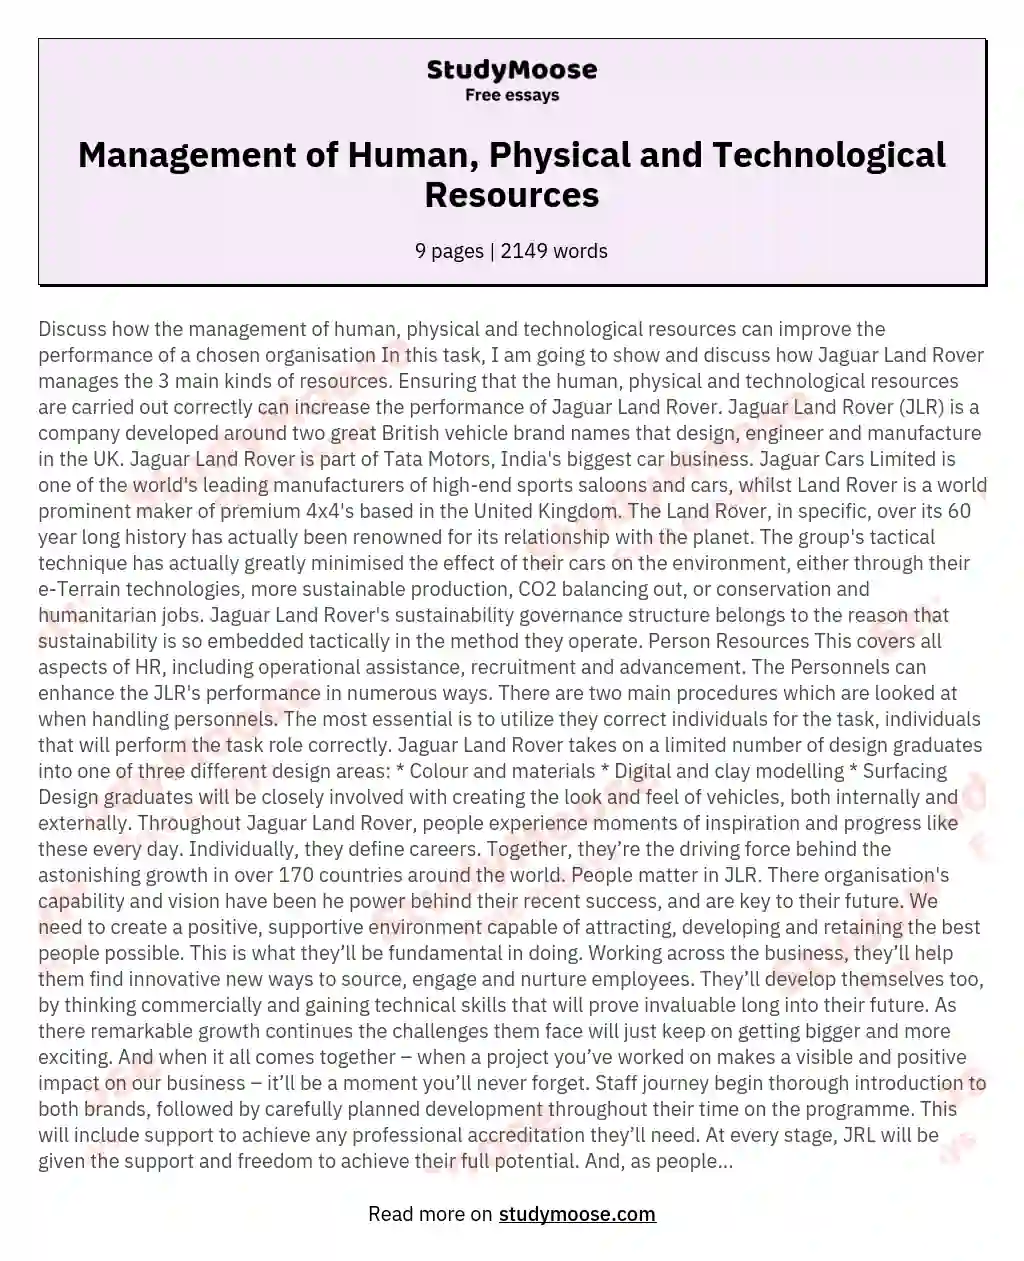 Management of Human, Physical and Technological Resources